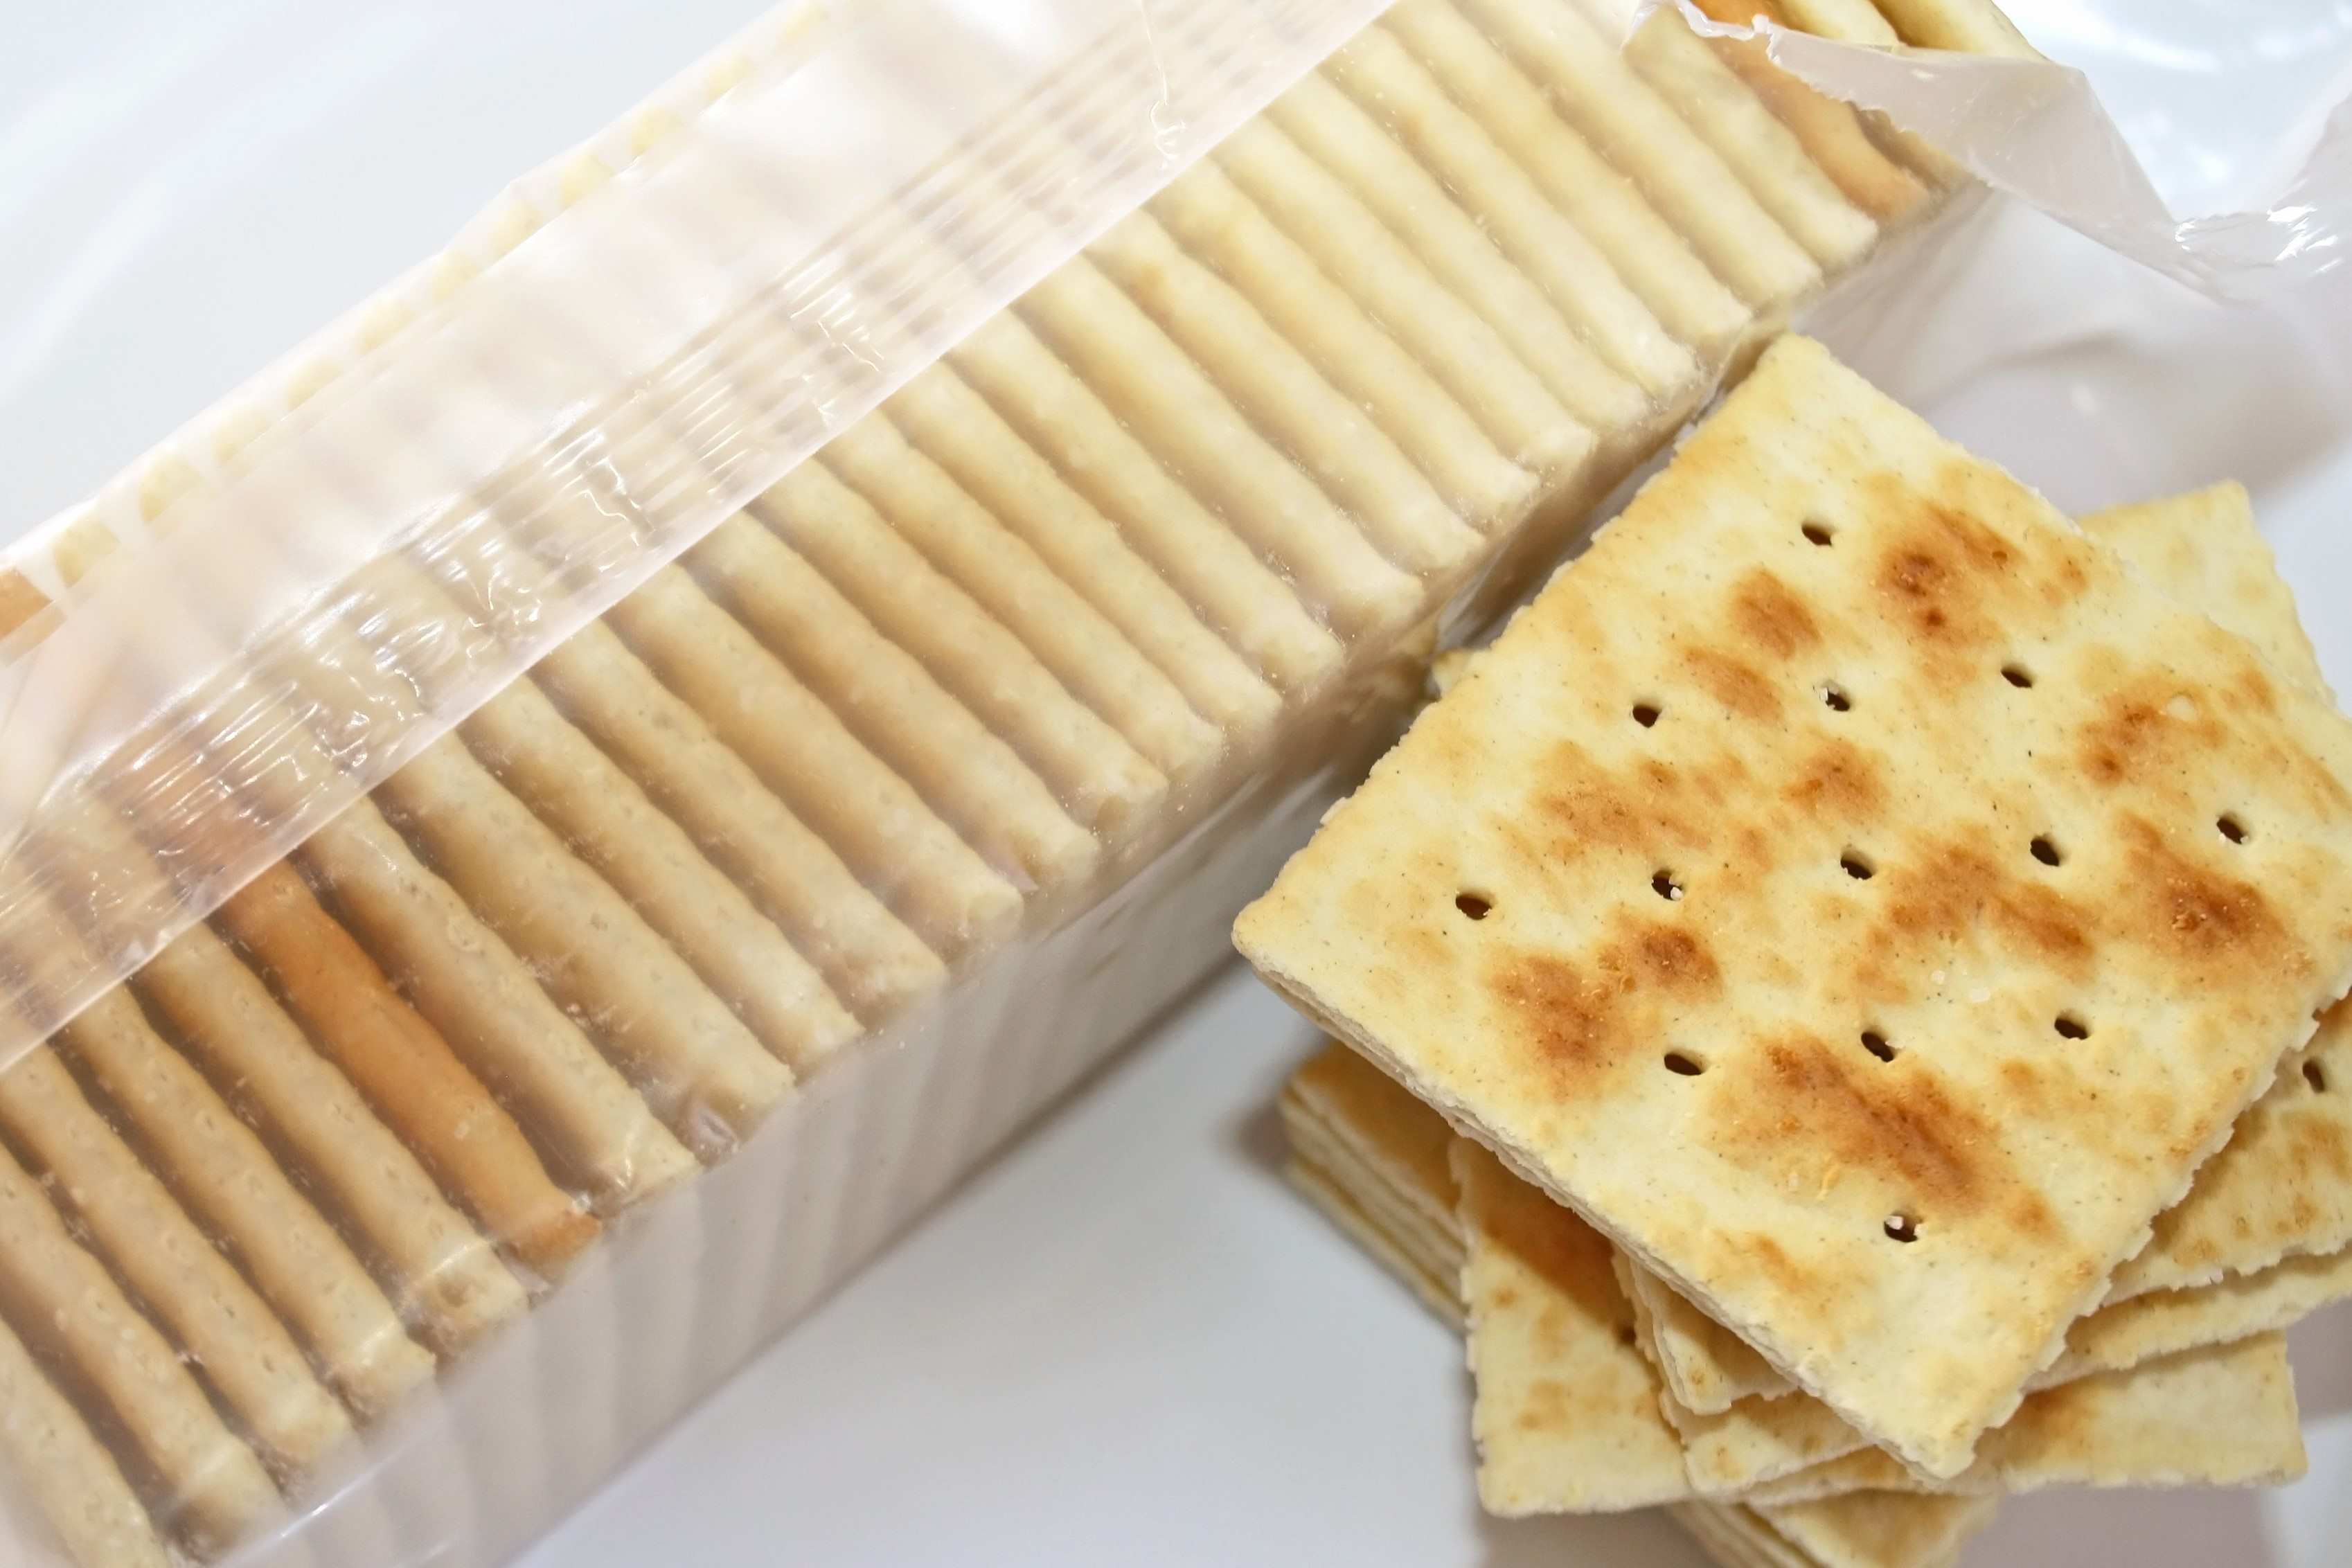 18-unsalted-saltine-crackers-nutrition-facts